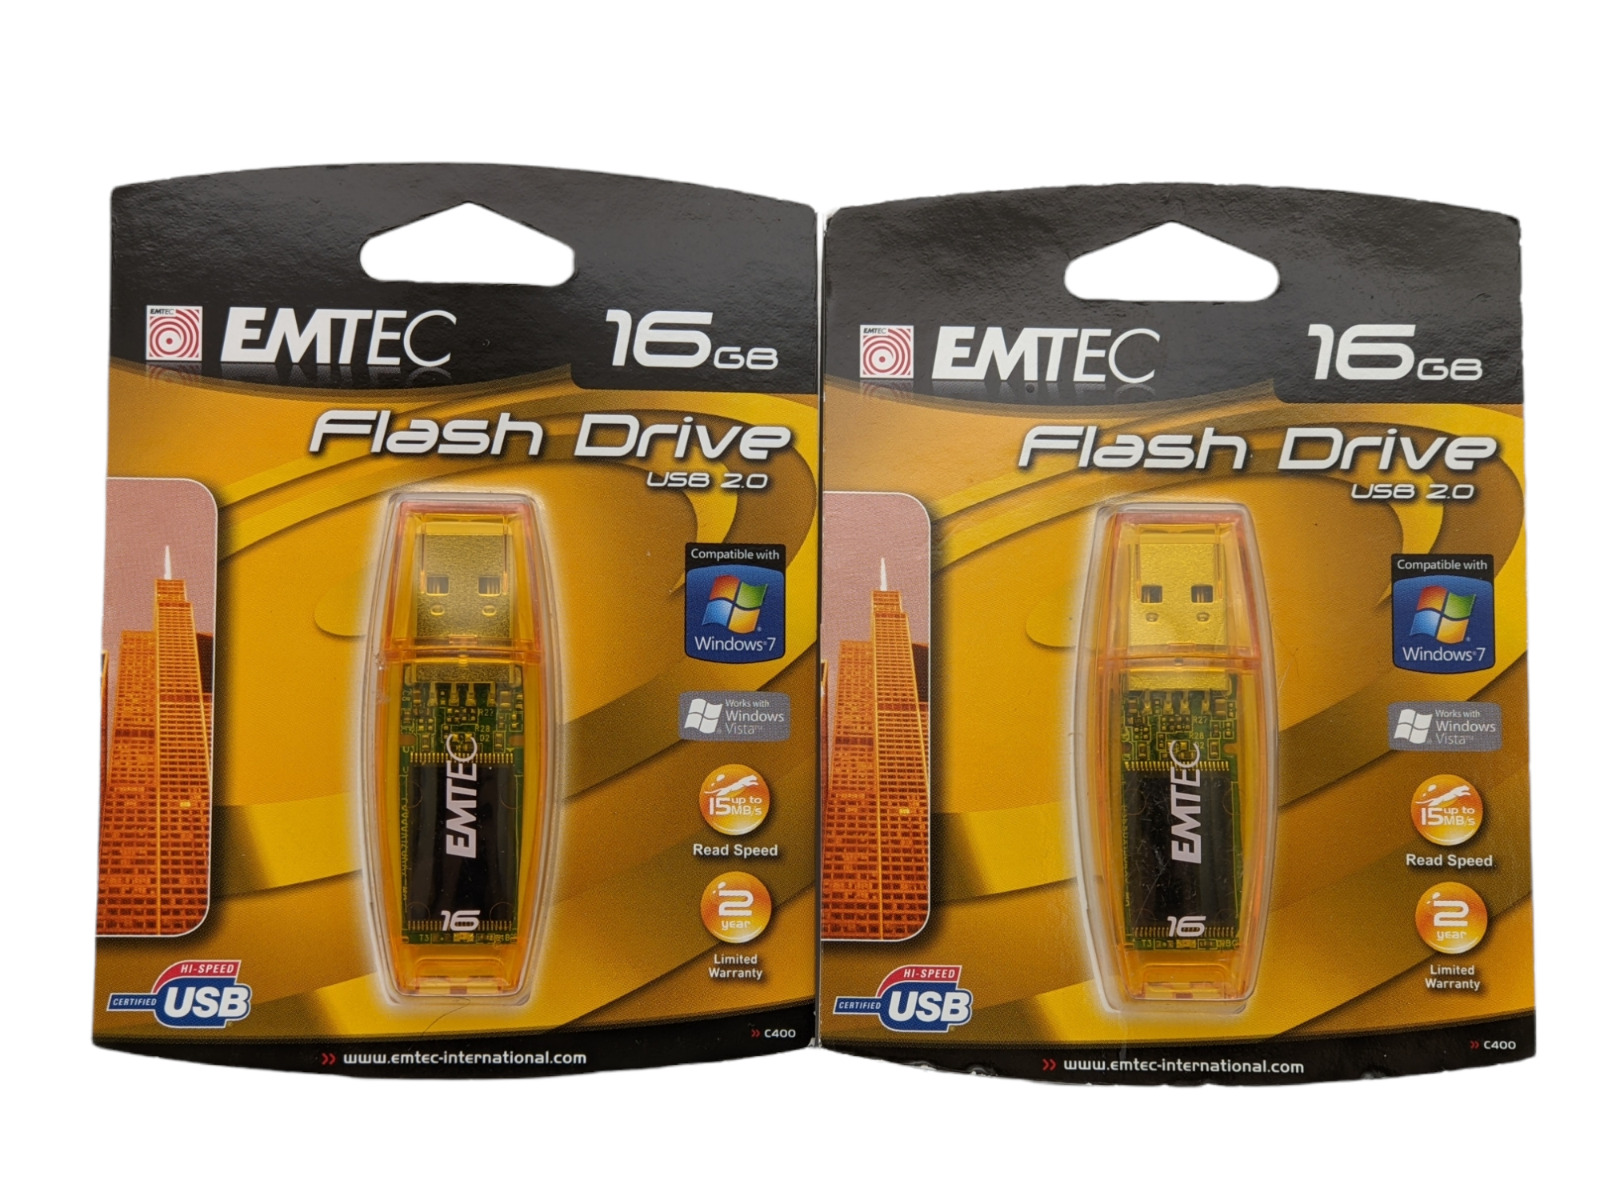 EMTEC400 16 GB USB Flash Drive Lot Of 2 Transparent-EKMMDIGGC40-Free Shipping. Available Now for 25.95